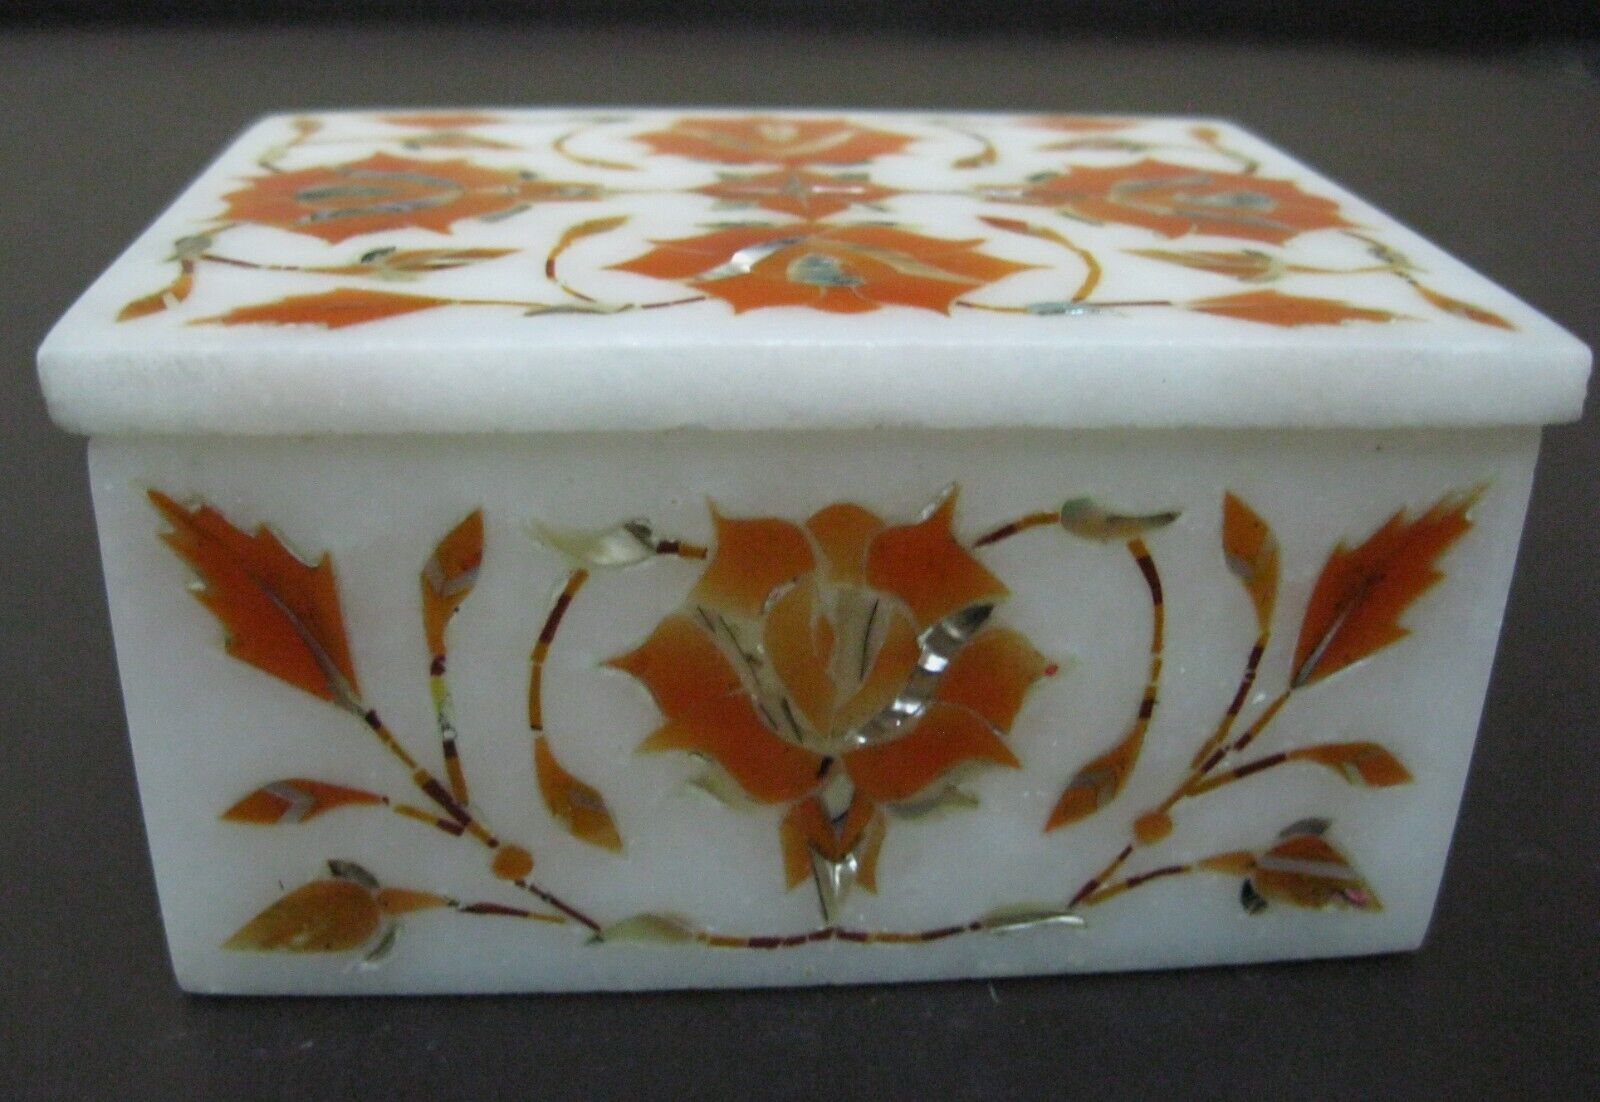 4 x 3 Inches Marble Cosmetic Box Inlaid with Carnelian Stone from Vintage Crafts